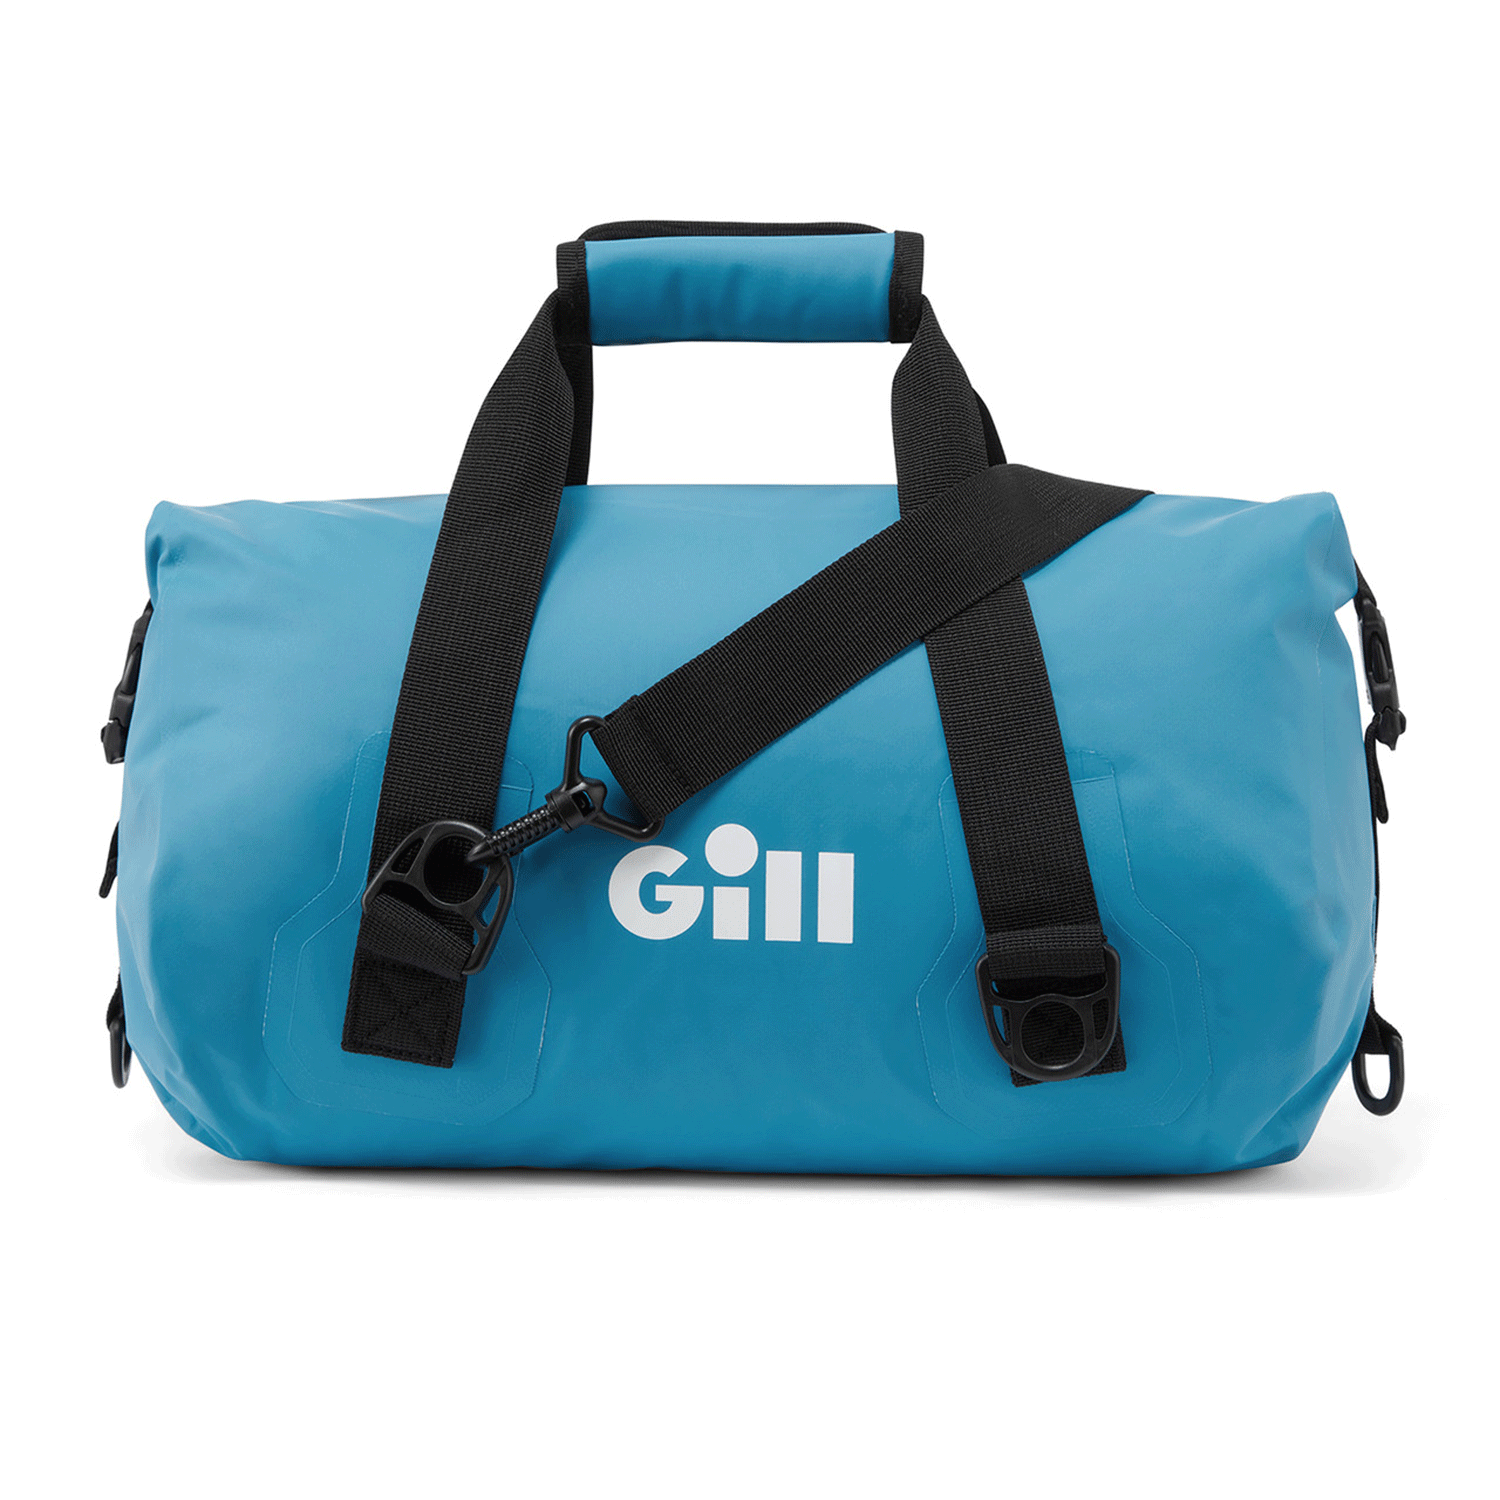 GILL-10L-Voyager-Duffel-Bag---Special-Edition-1